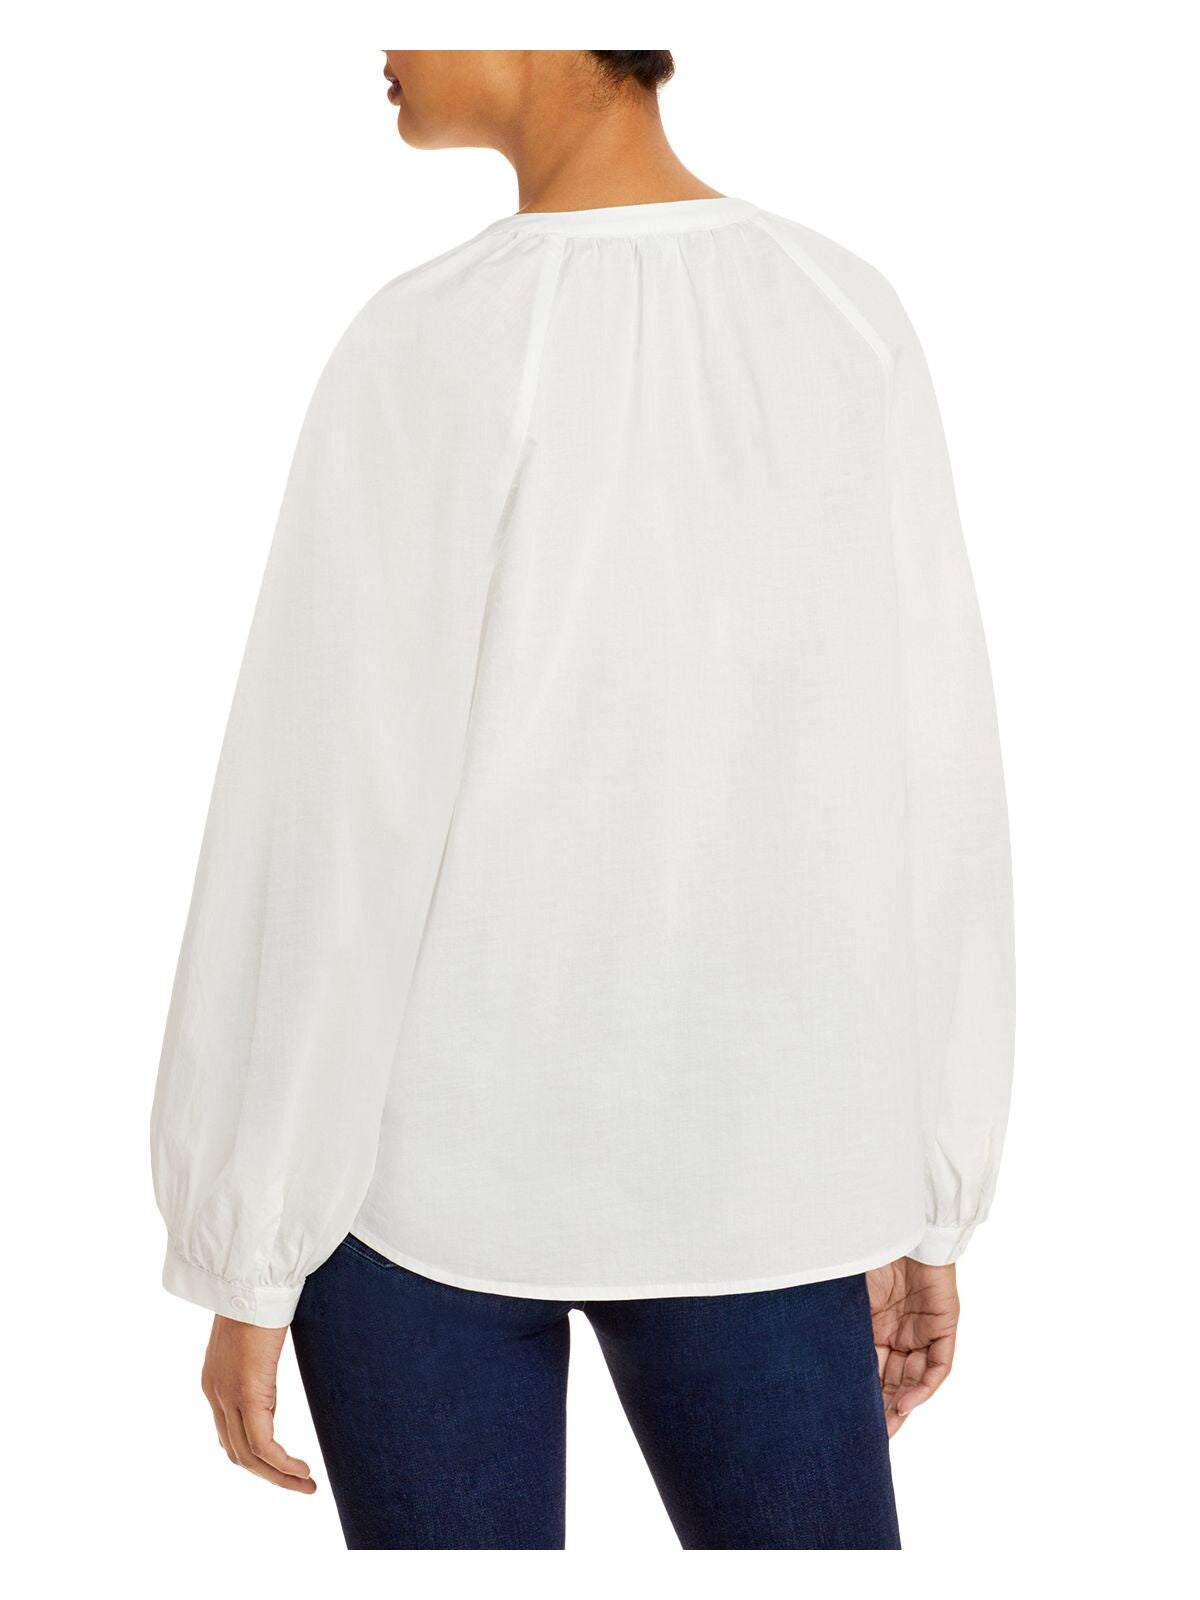 JOIE Womens White Poplin Pleated Button Pullover Cuffed Sleeve Crew Neck Top S